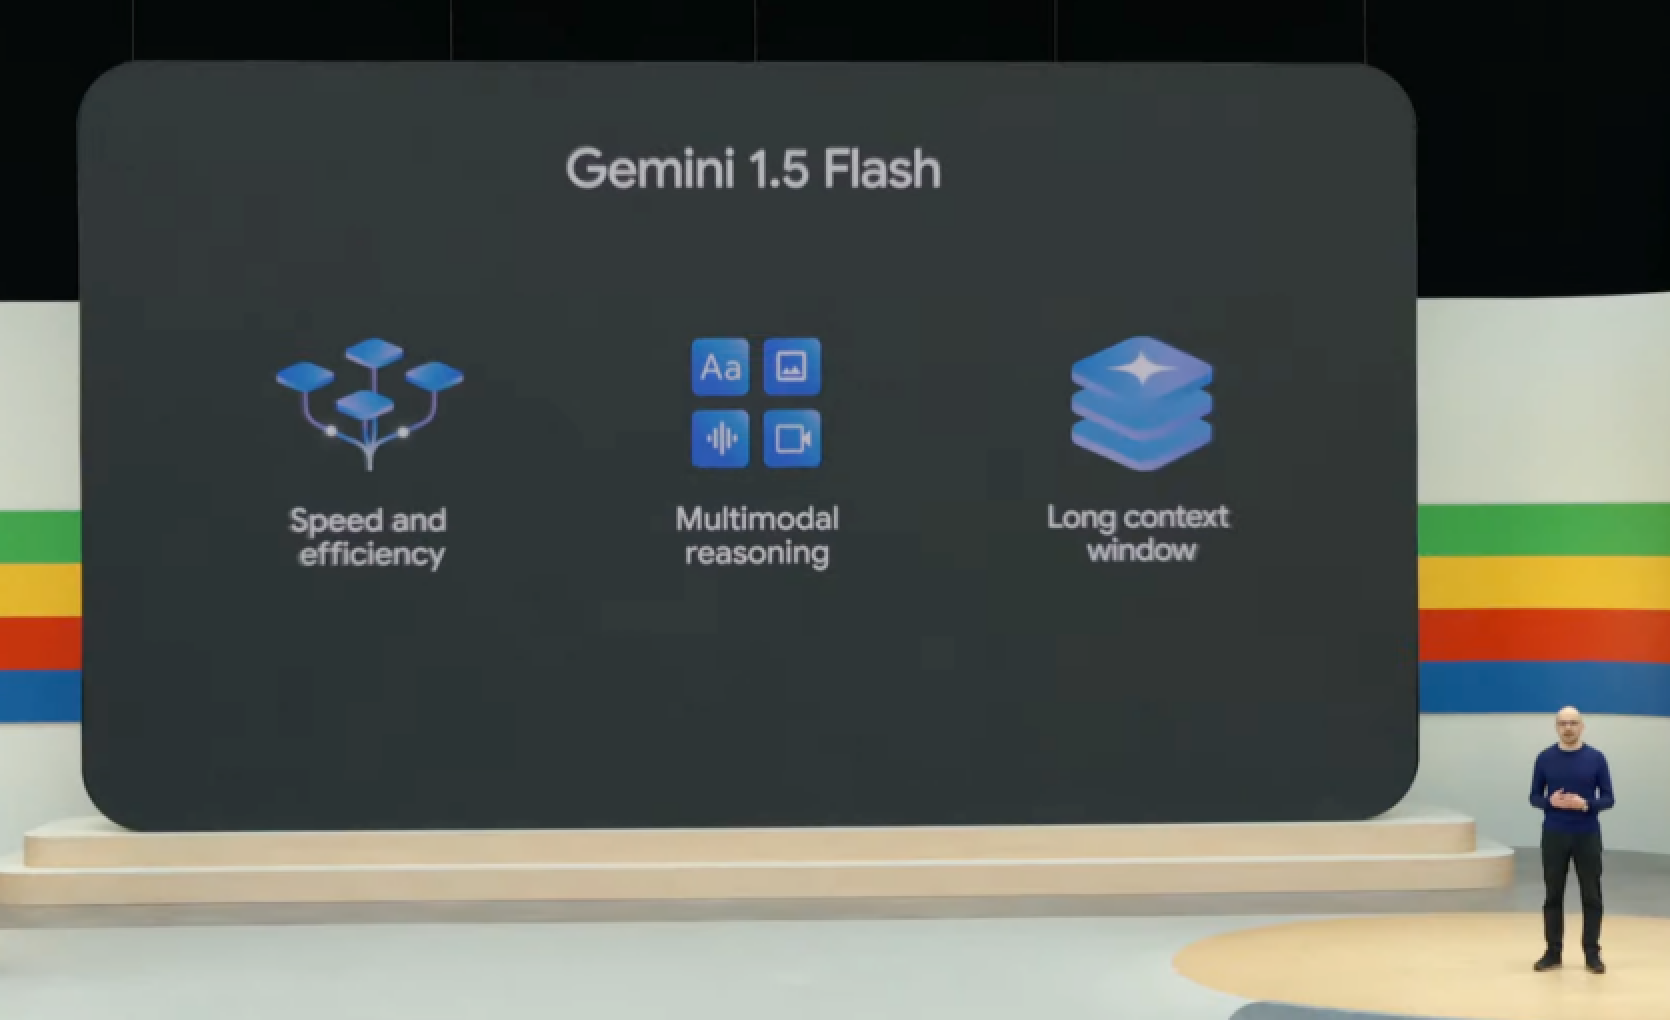 Gemini 1.5 Flash - Google's fast multimodal model with a contextual window of 2 million tokens